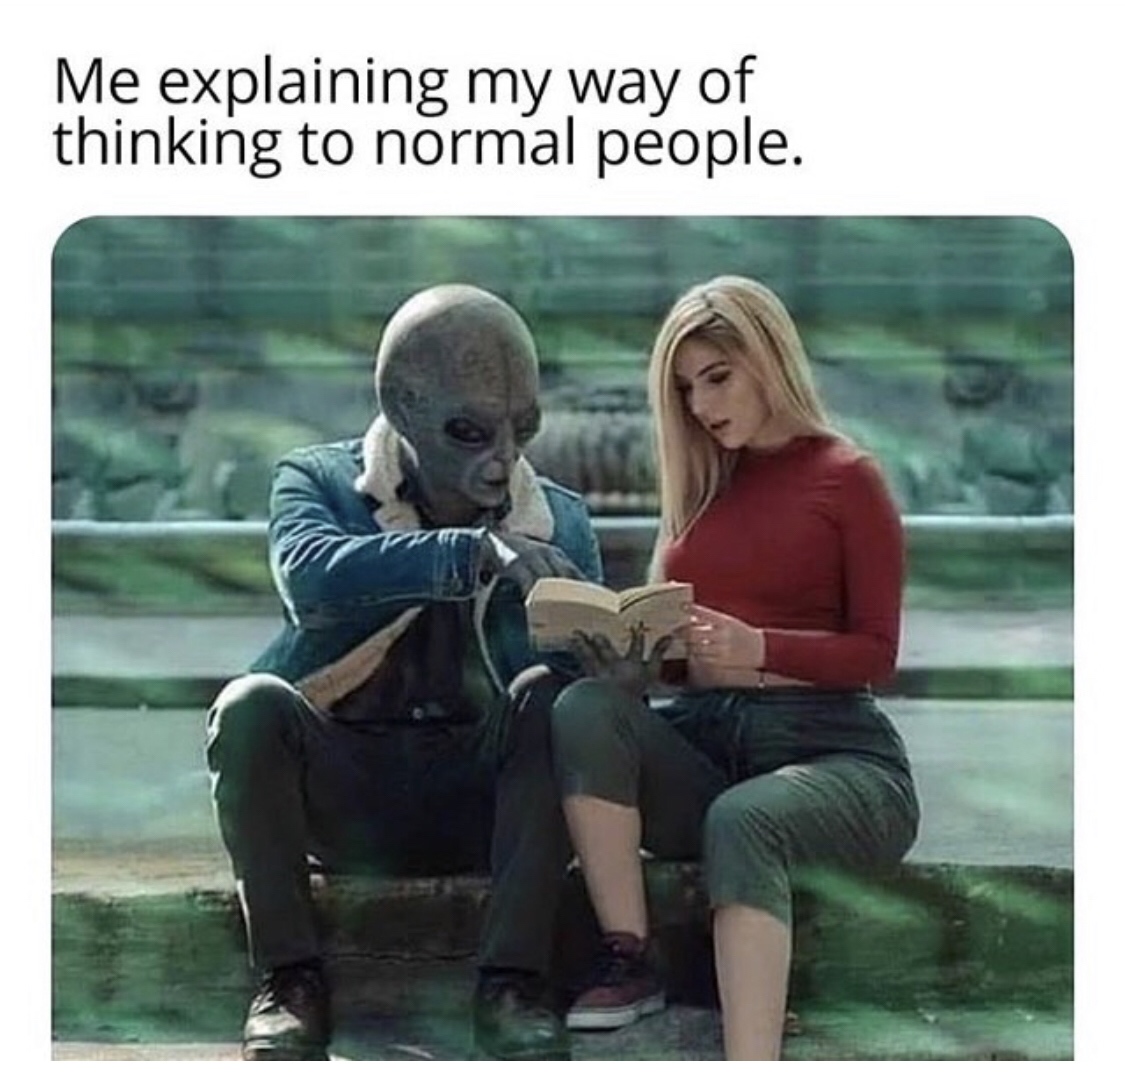 me explaining my way to normal people - Me explaining my way of thinking to normal people.